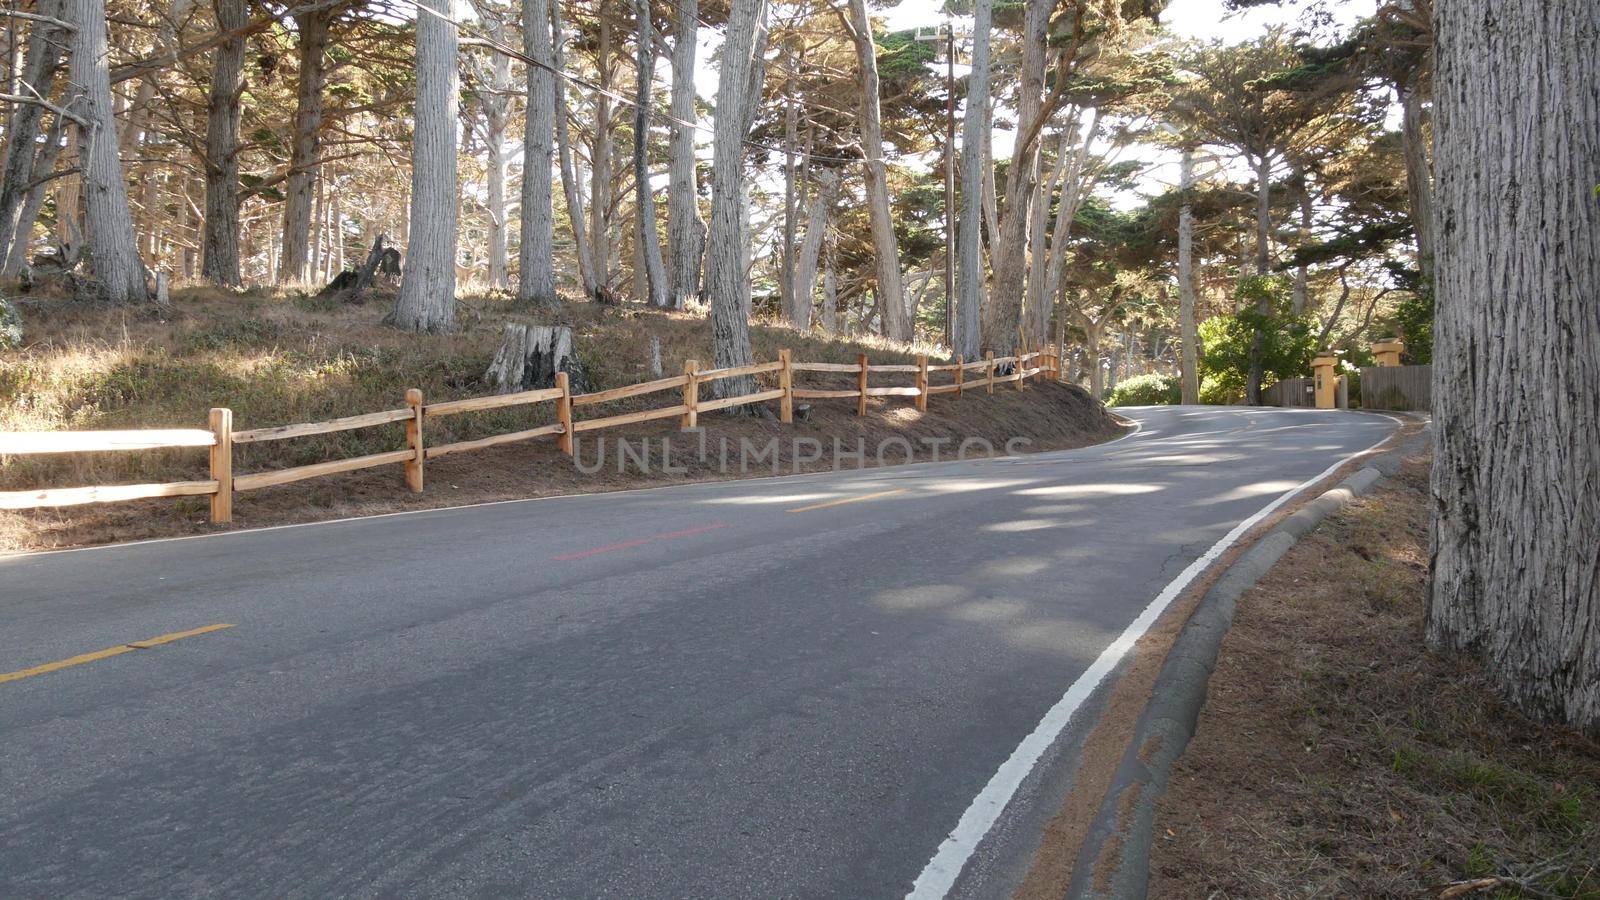 17-mile drive scenic road, Monterey peninsula, California, USA. Road trip thru cypress tree forest, coniferous evergreen pine woodland, grove or woods. Pacific coast highway tourist route near Big Sur